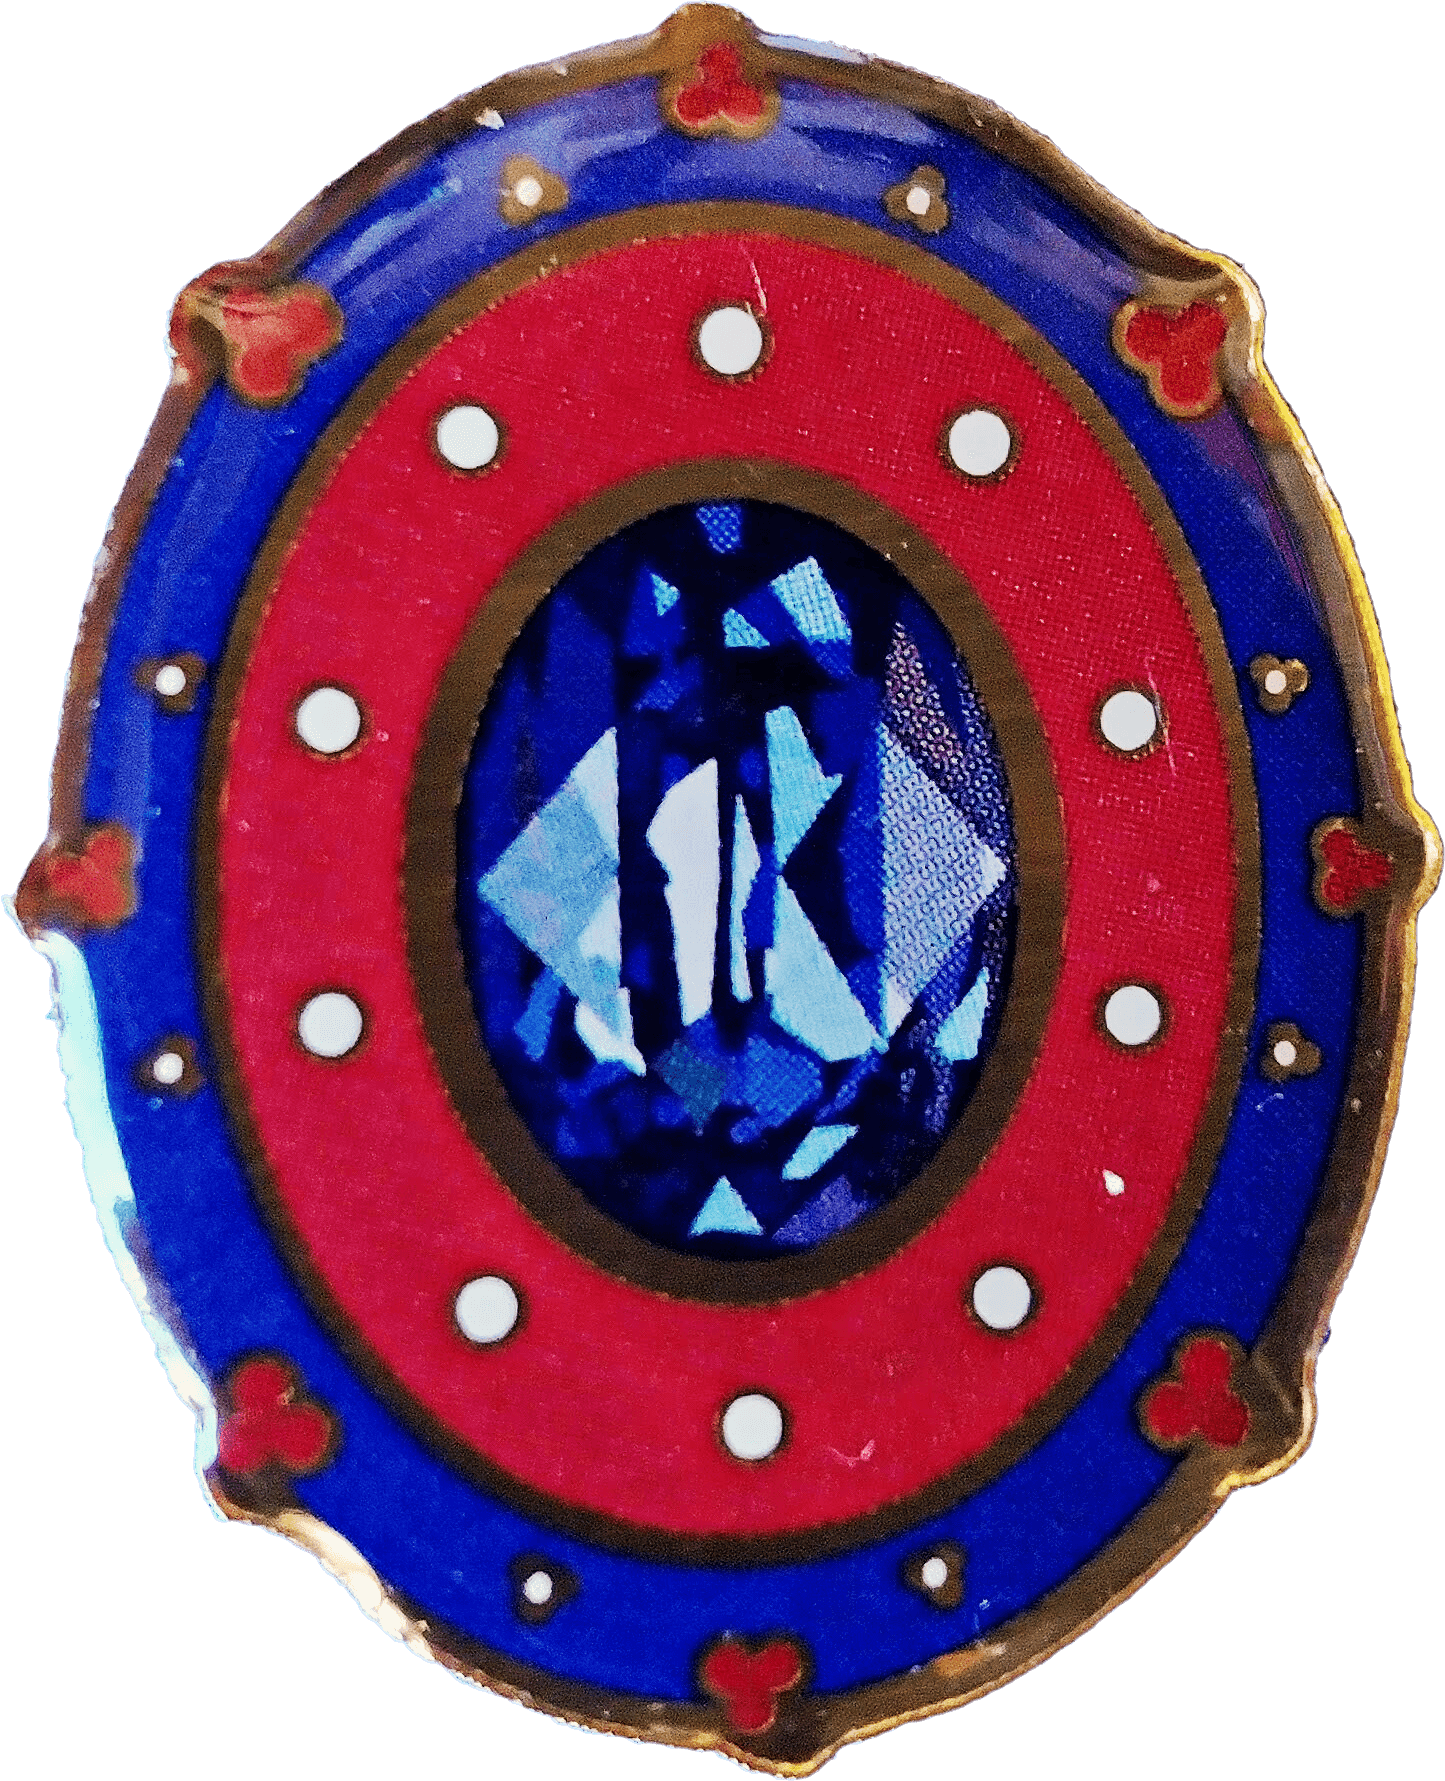 An oval blue and red artistic design